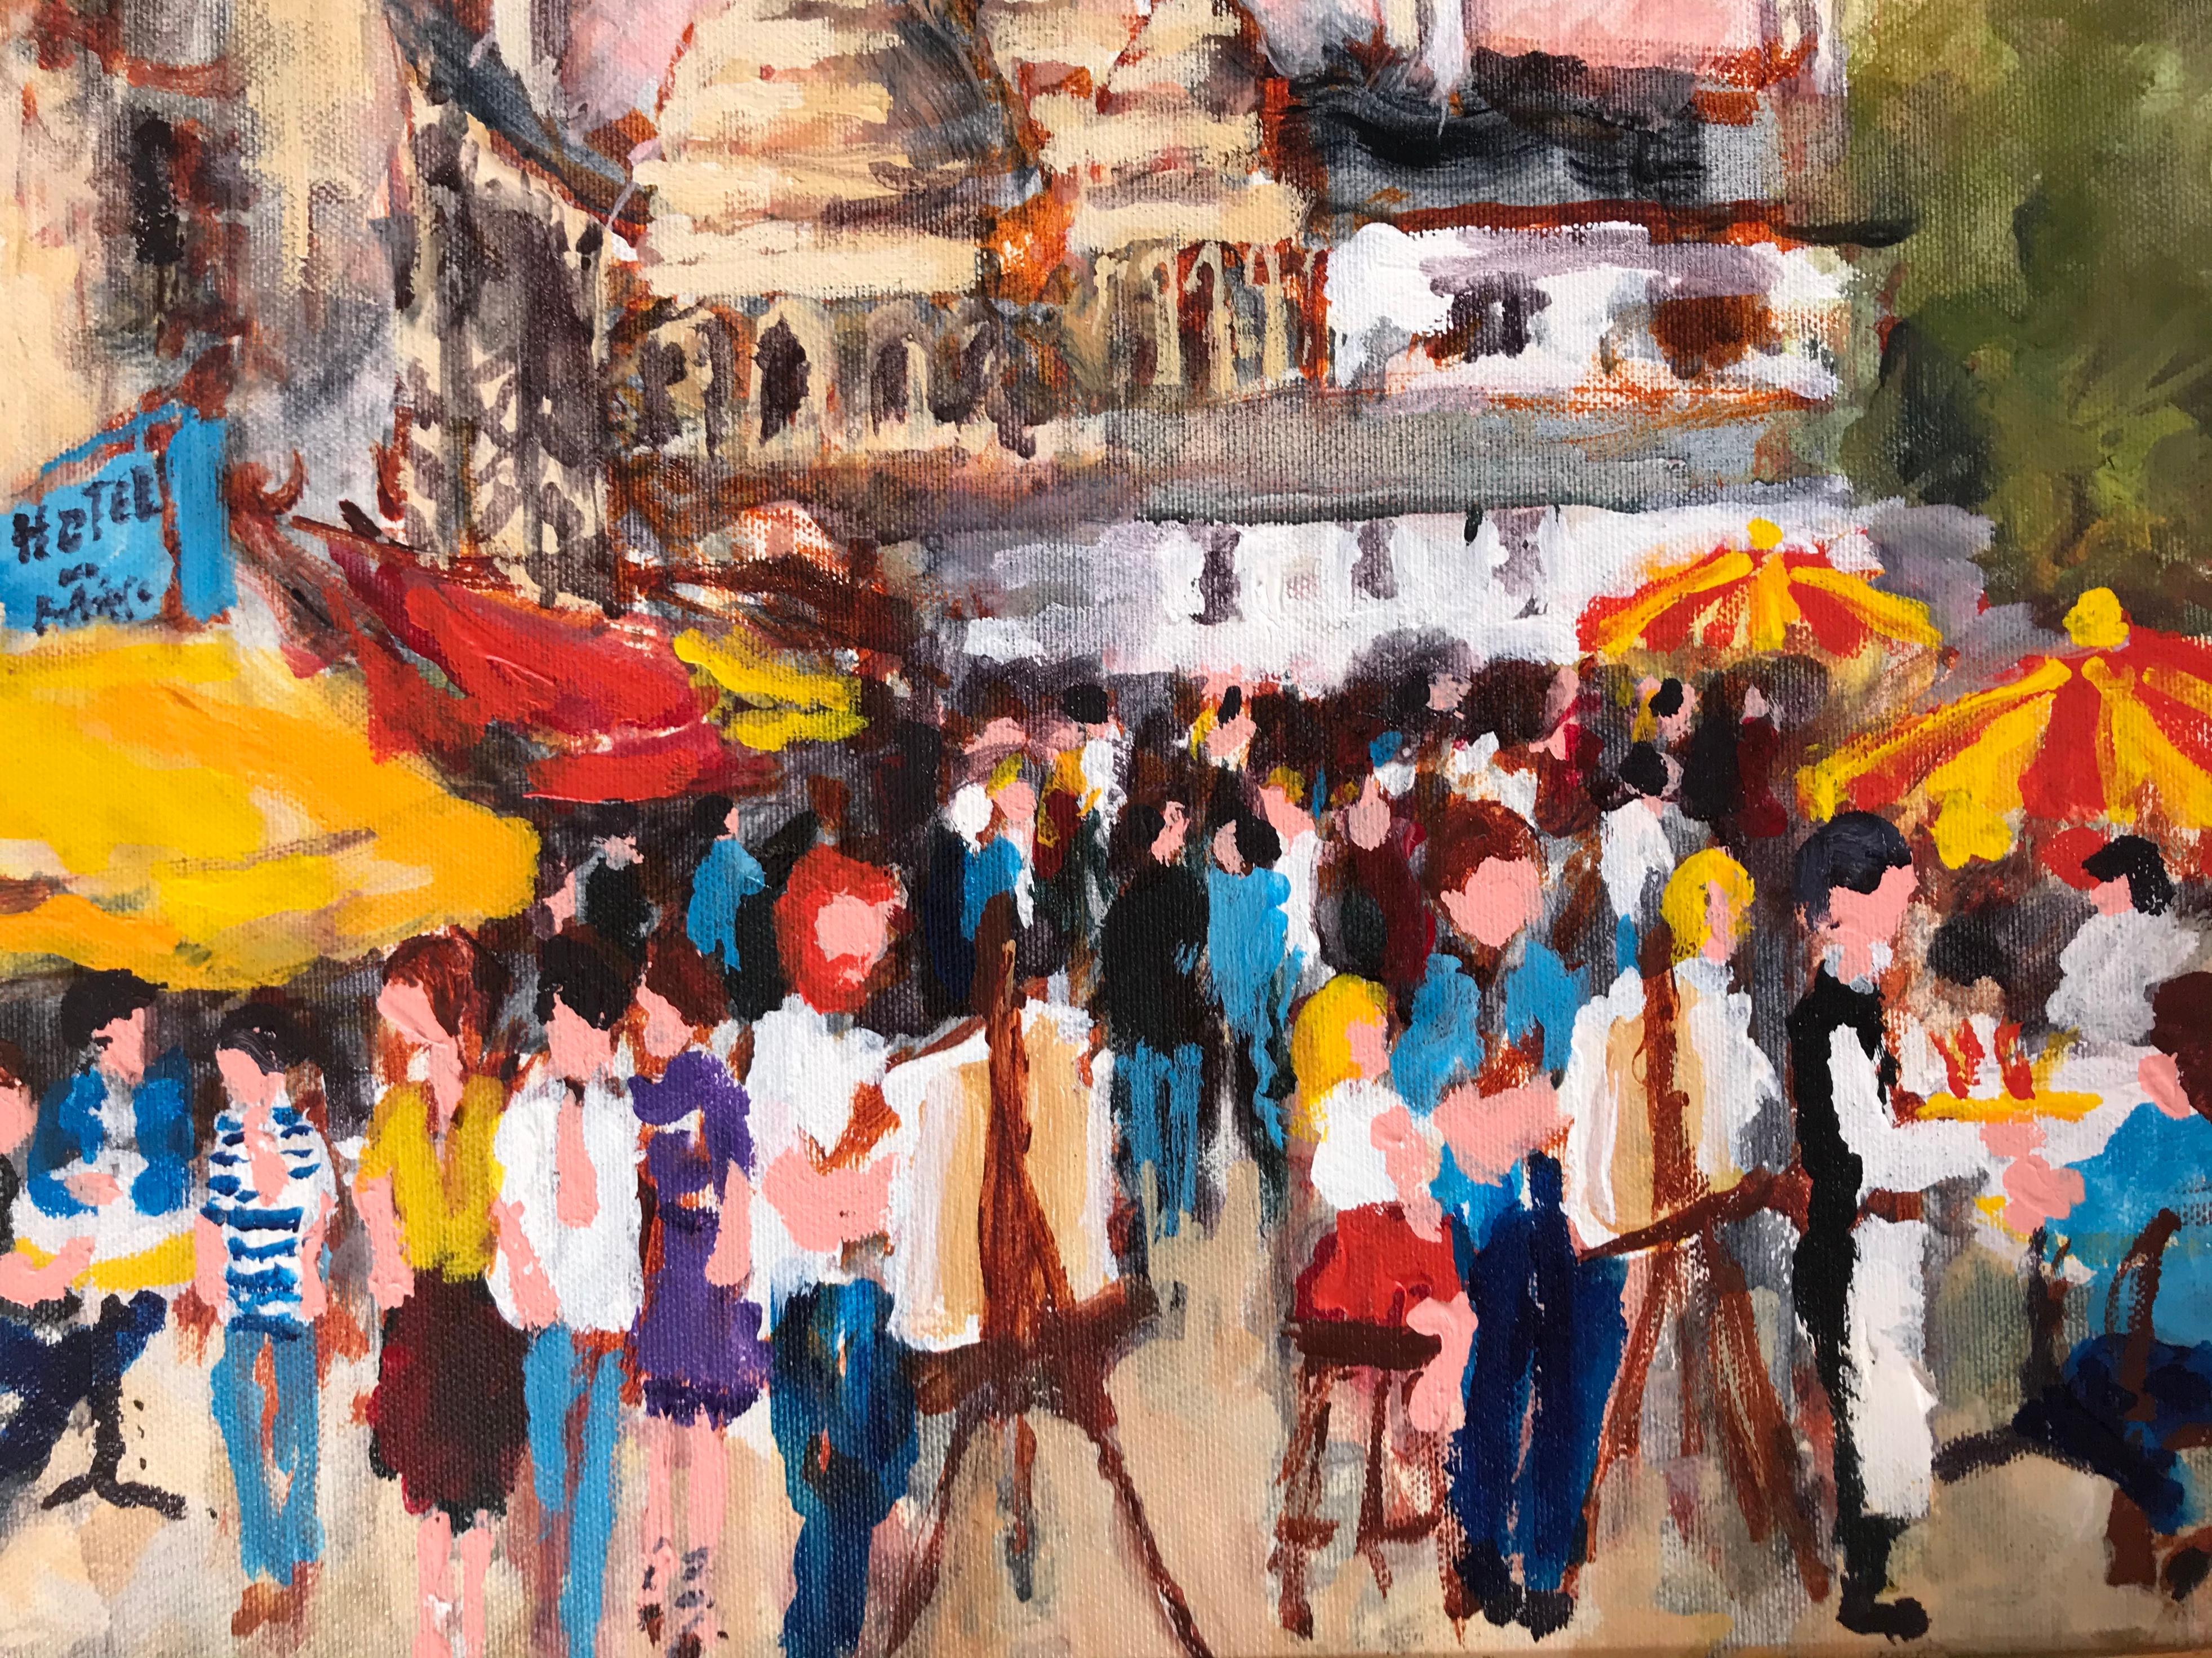 “Montmartre” - Contemporary Painting by Urbain Huchet